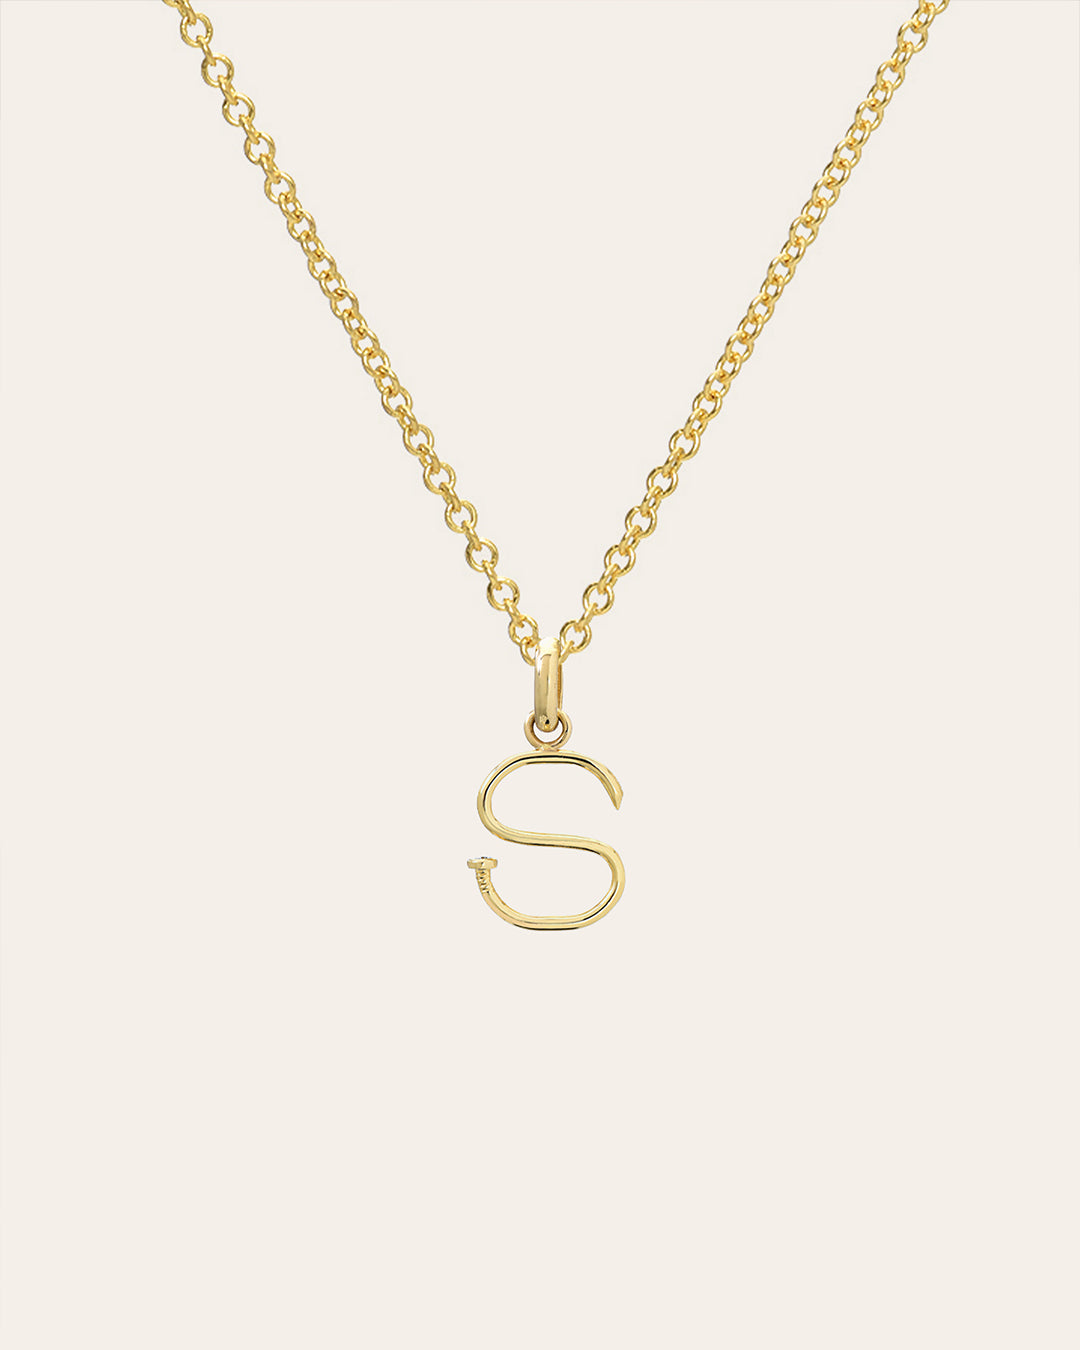 Buy Gold Tiny Necklace, Small Letter Necklace, Dainty Letter Necklace,  Dainty Gold Chain, Dainty Gift Necklace, Gold Letter Necklace Online in  India - Etsy